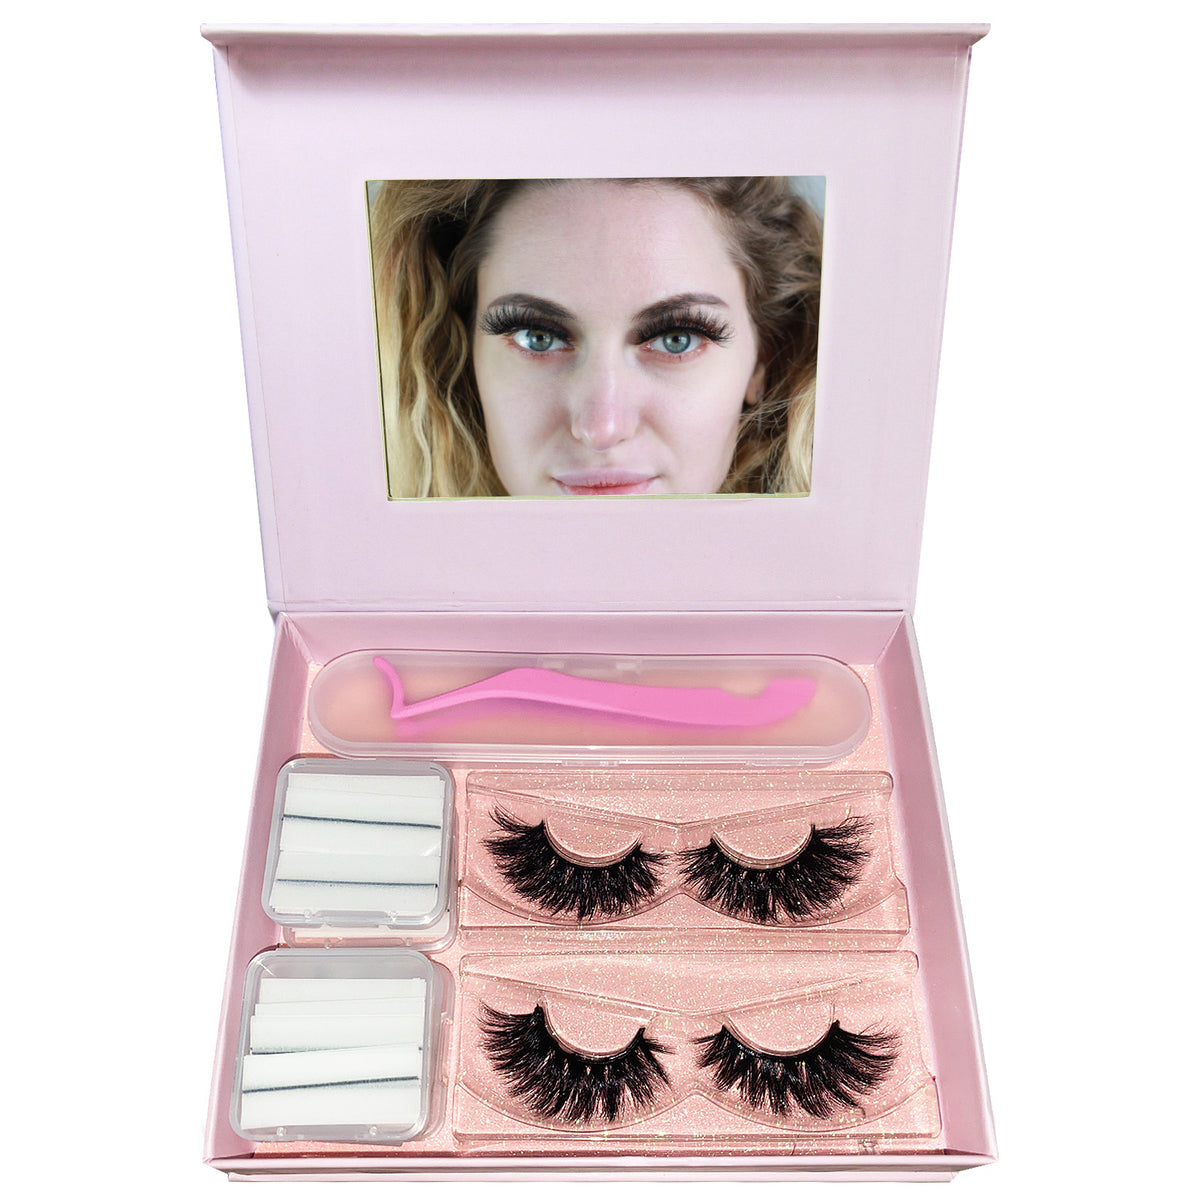 Self-Adhesive Real Mink Eyelashes Set Including 2 Pairs of Mink Lashes,1 Tweezer and 4 Pack of Self-adhesive Lash Strips